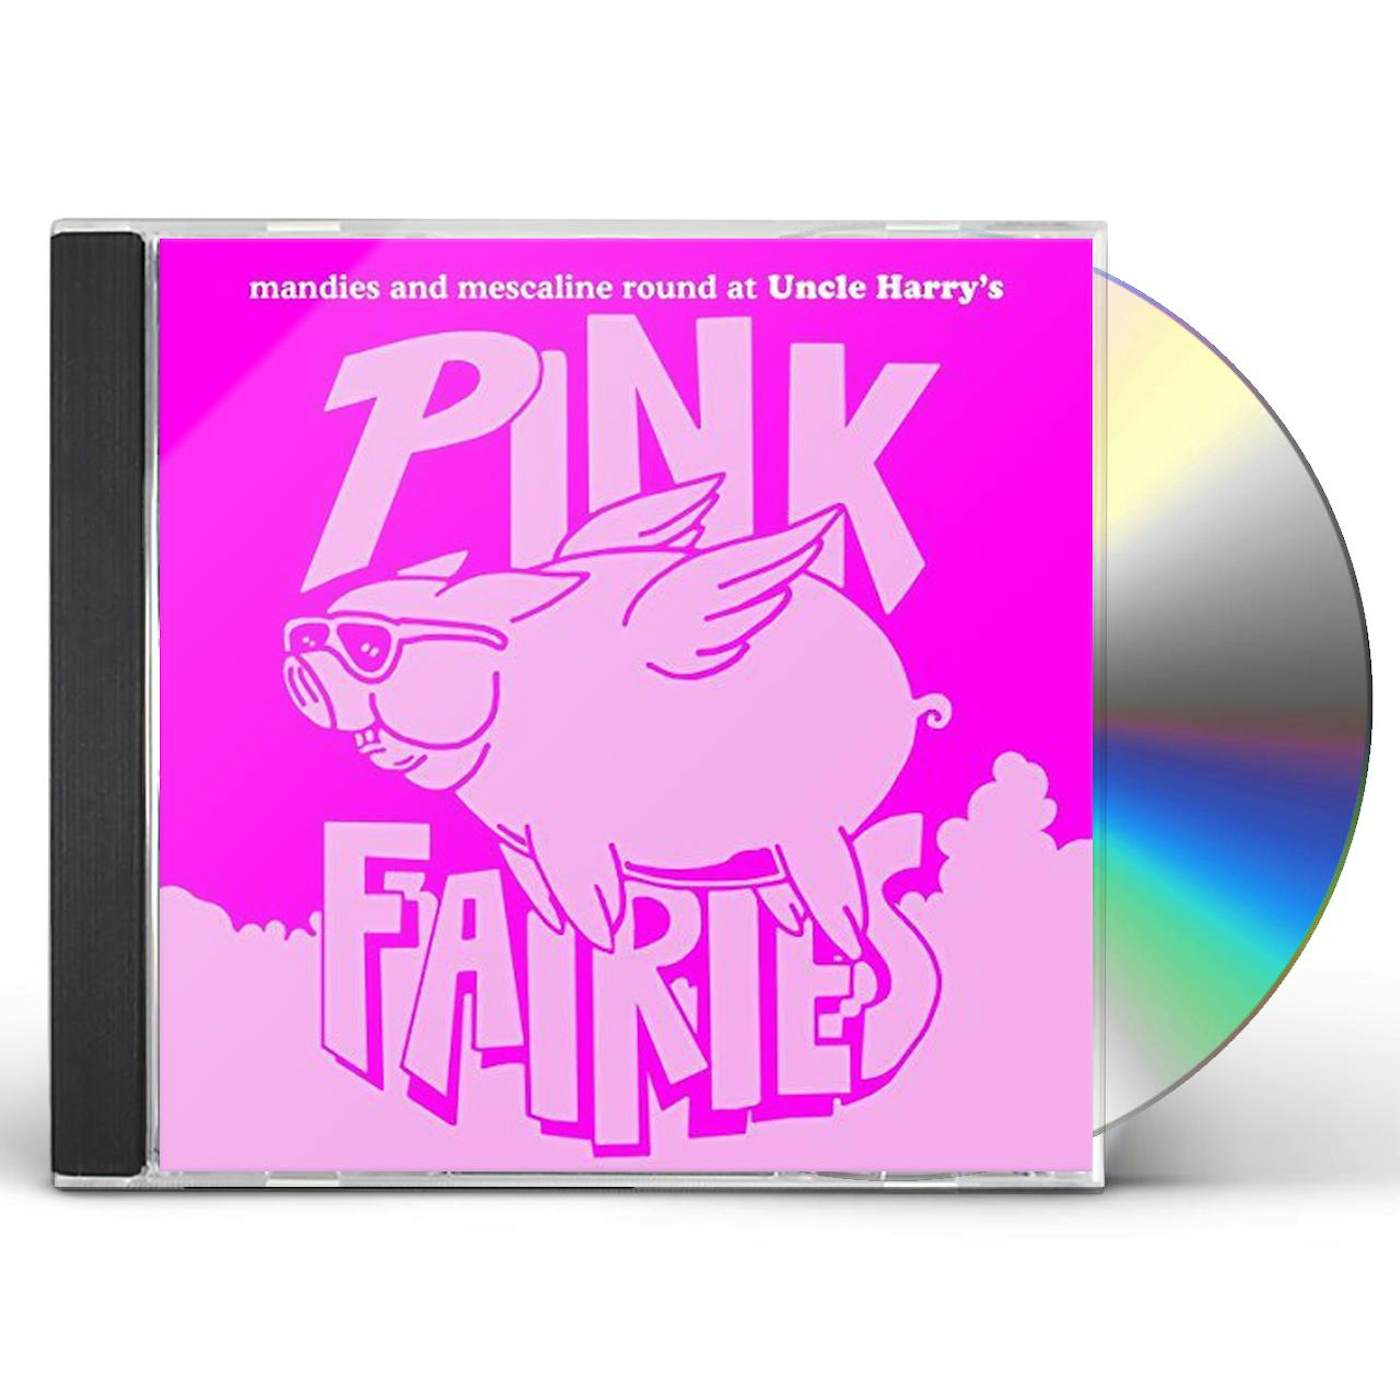 The Pink Fairies MANIES AND MESCALINE ROUND AT UNCLE HARRY'S CD